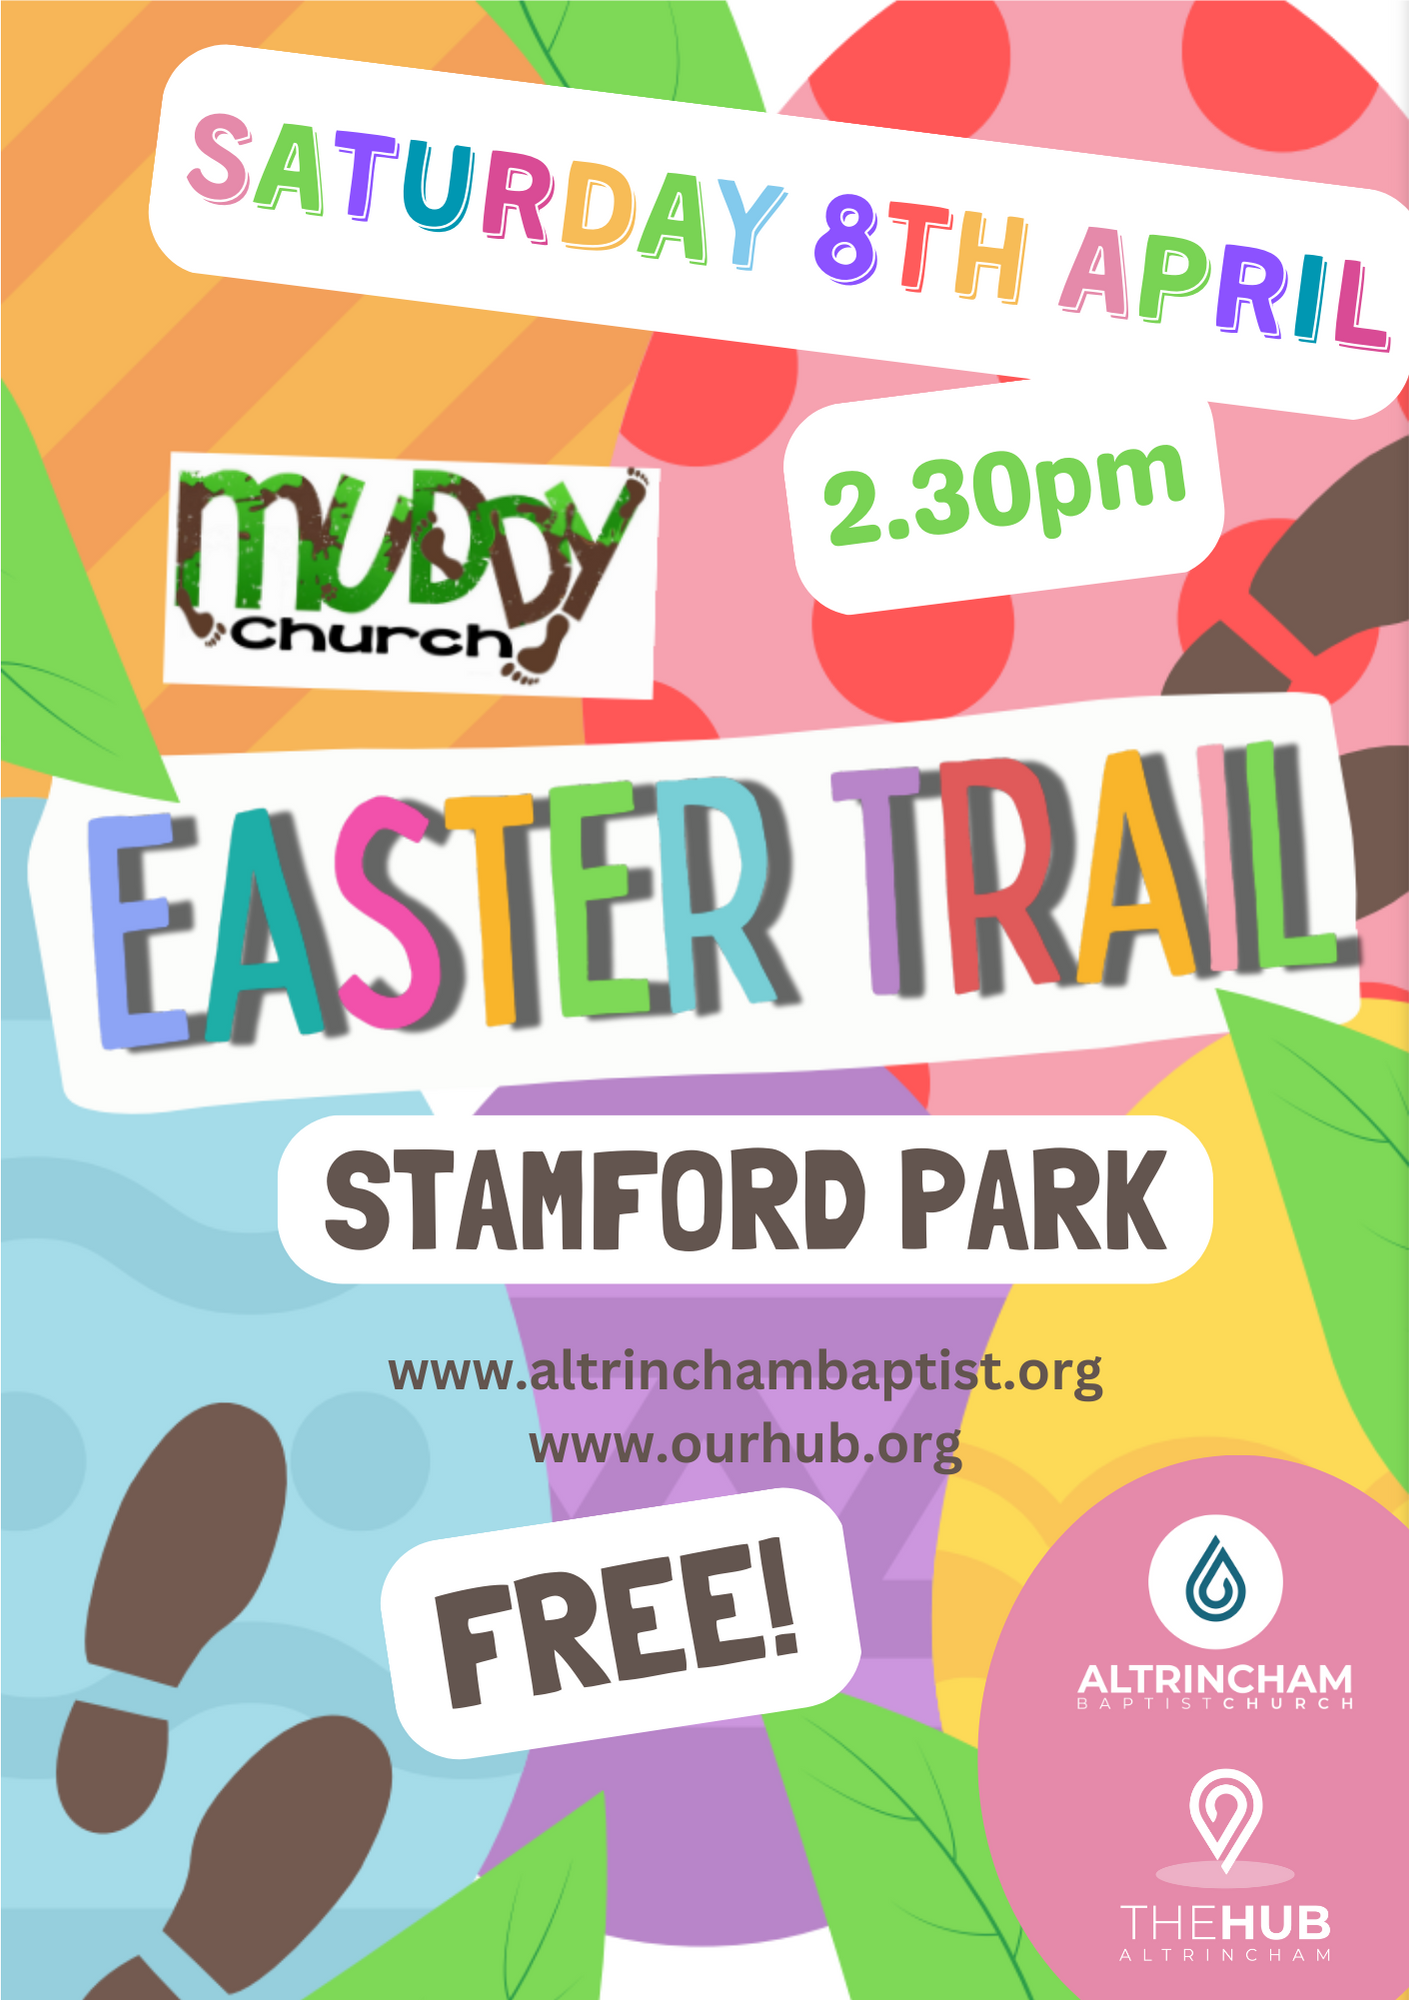 EASTER TRAIL